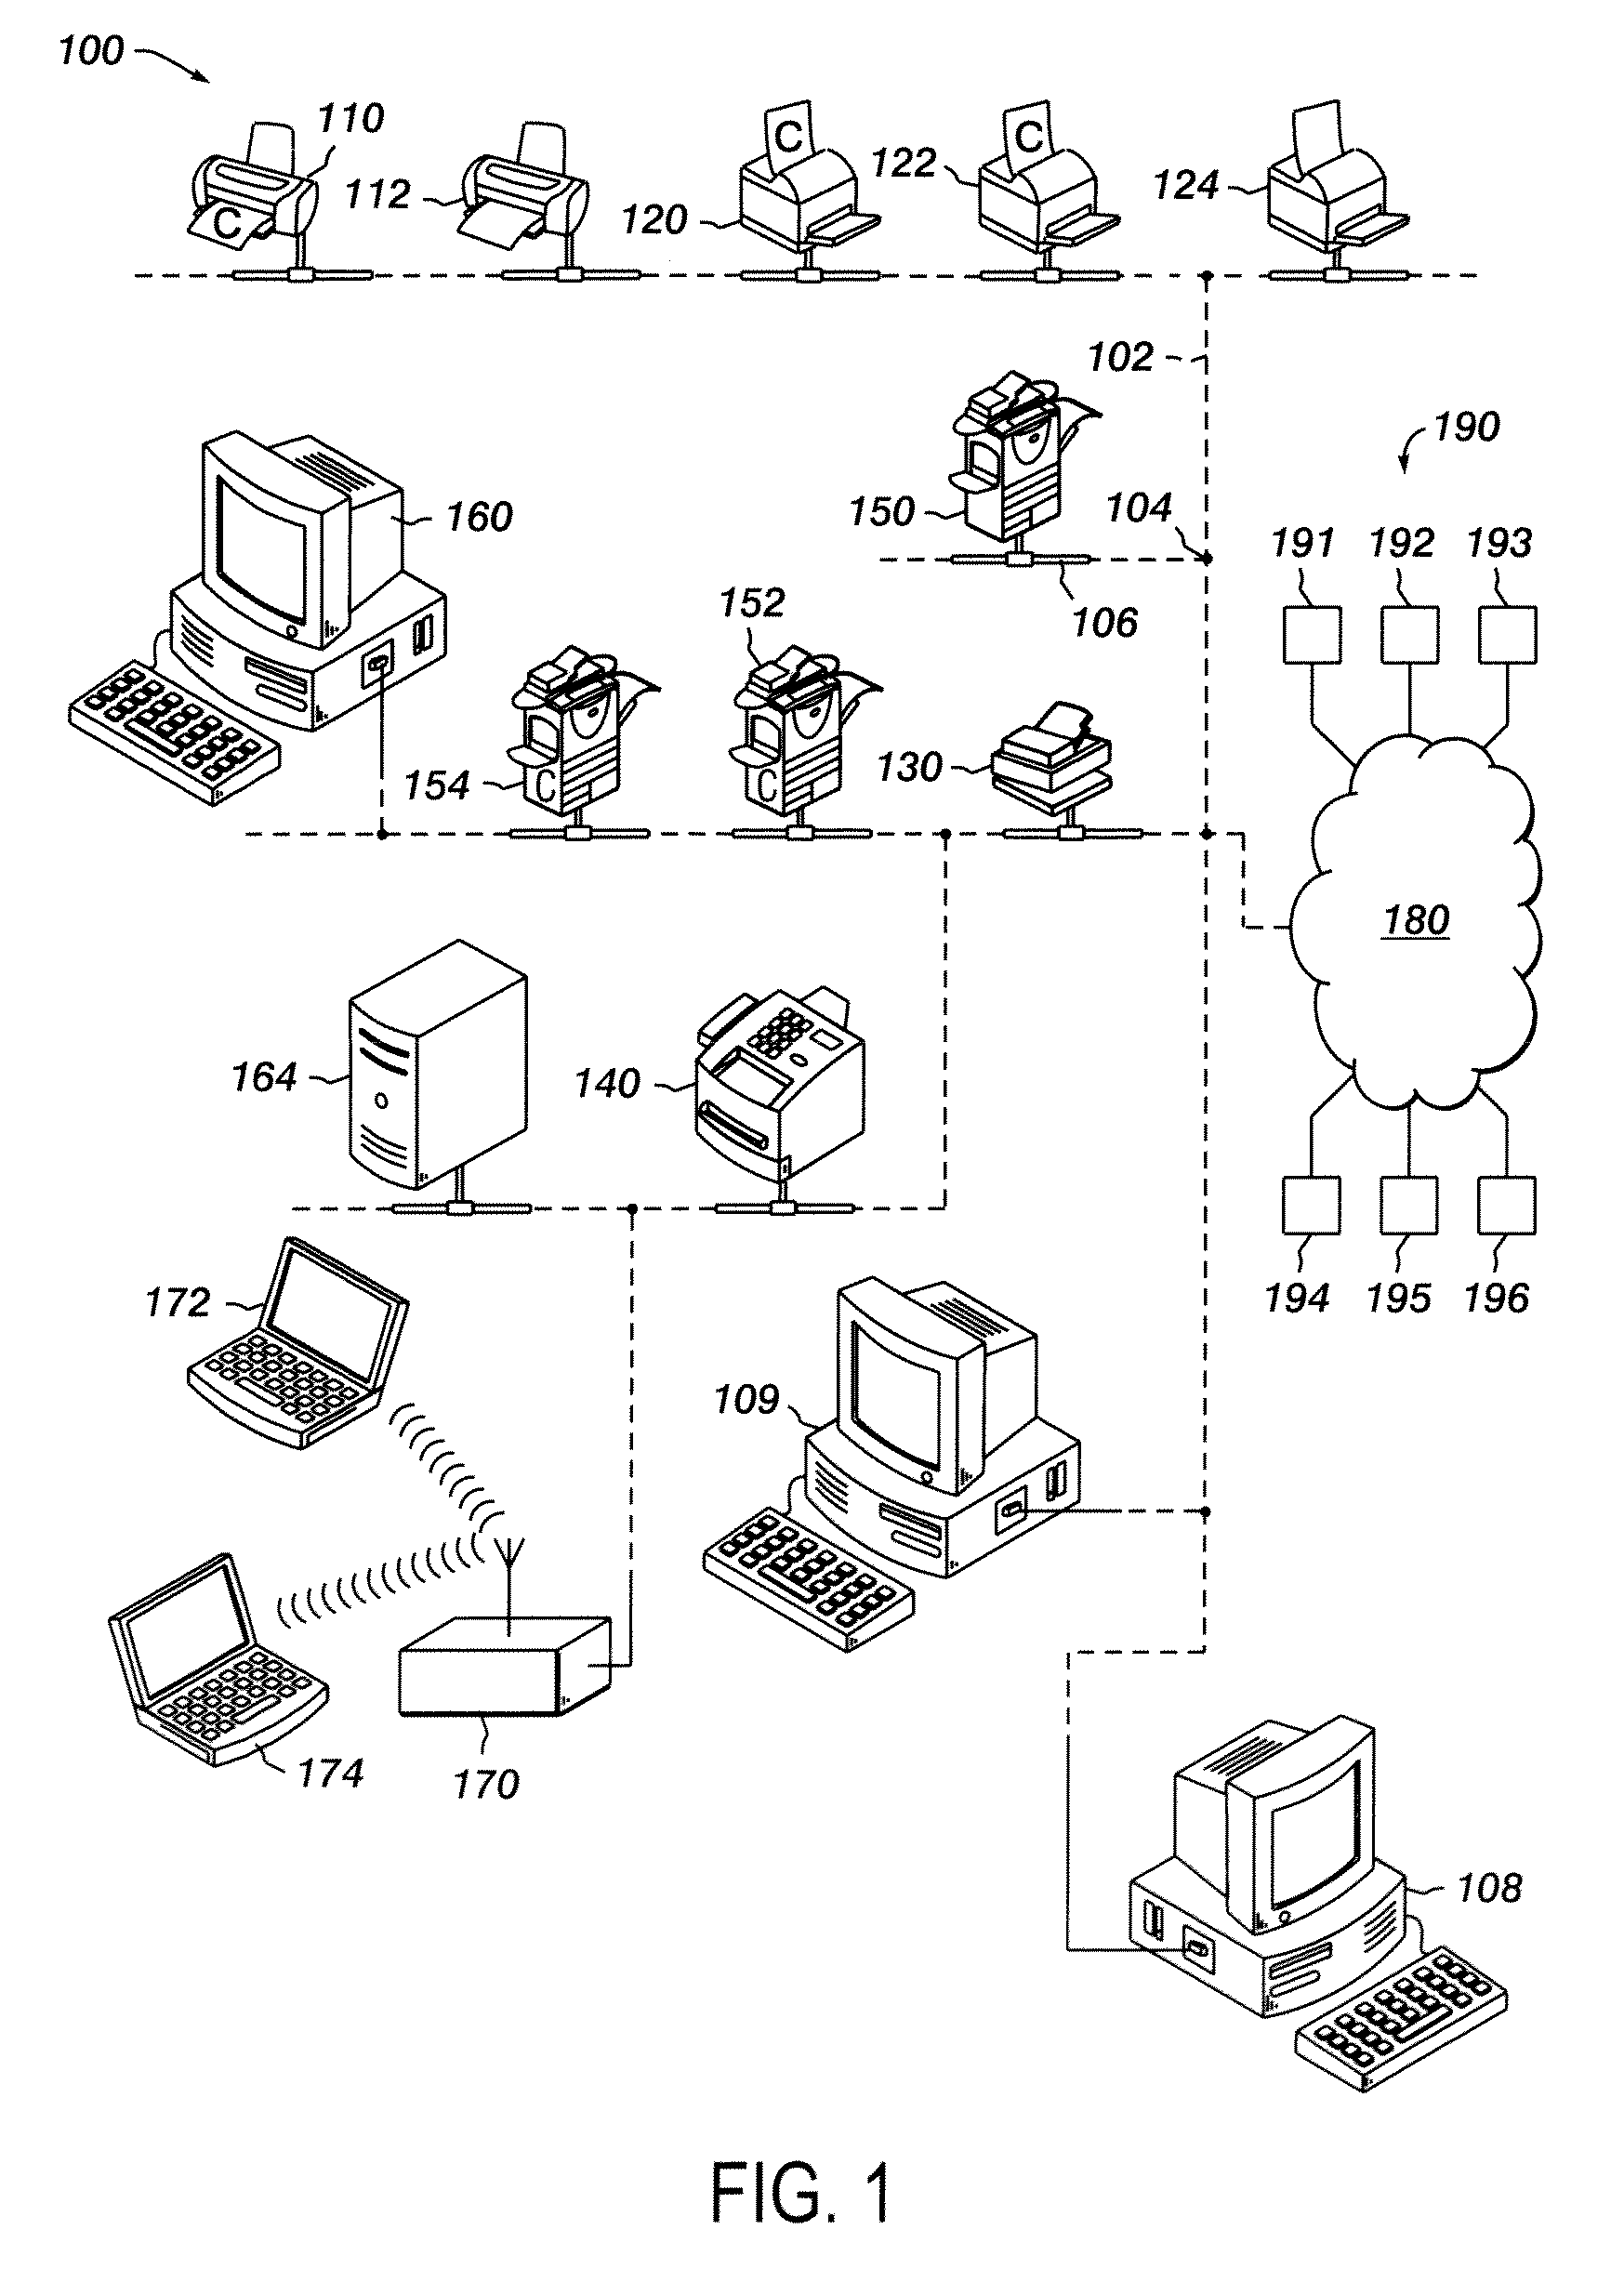 System and method for finding a picture image in an image collection using localized two-dimensional visual fingerprints